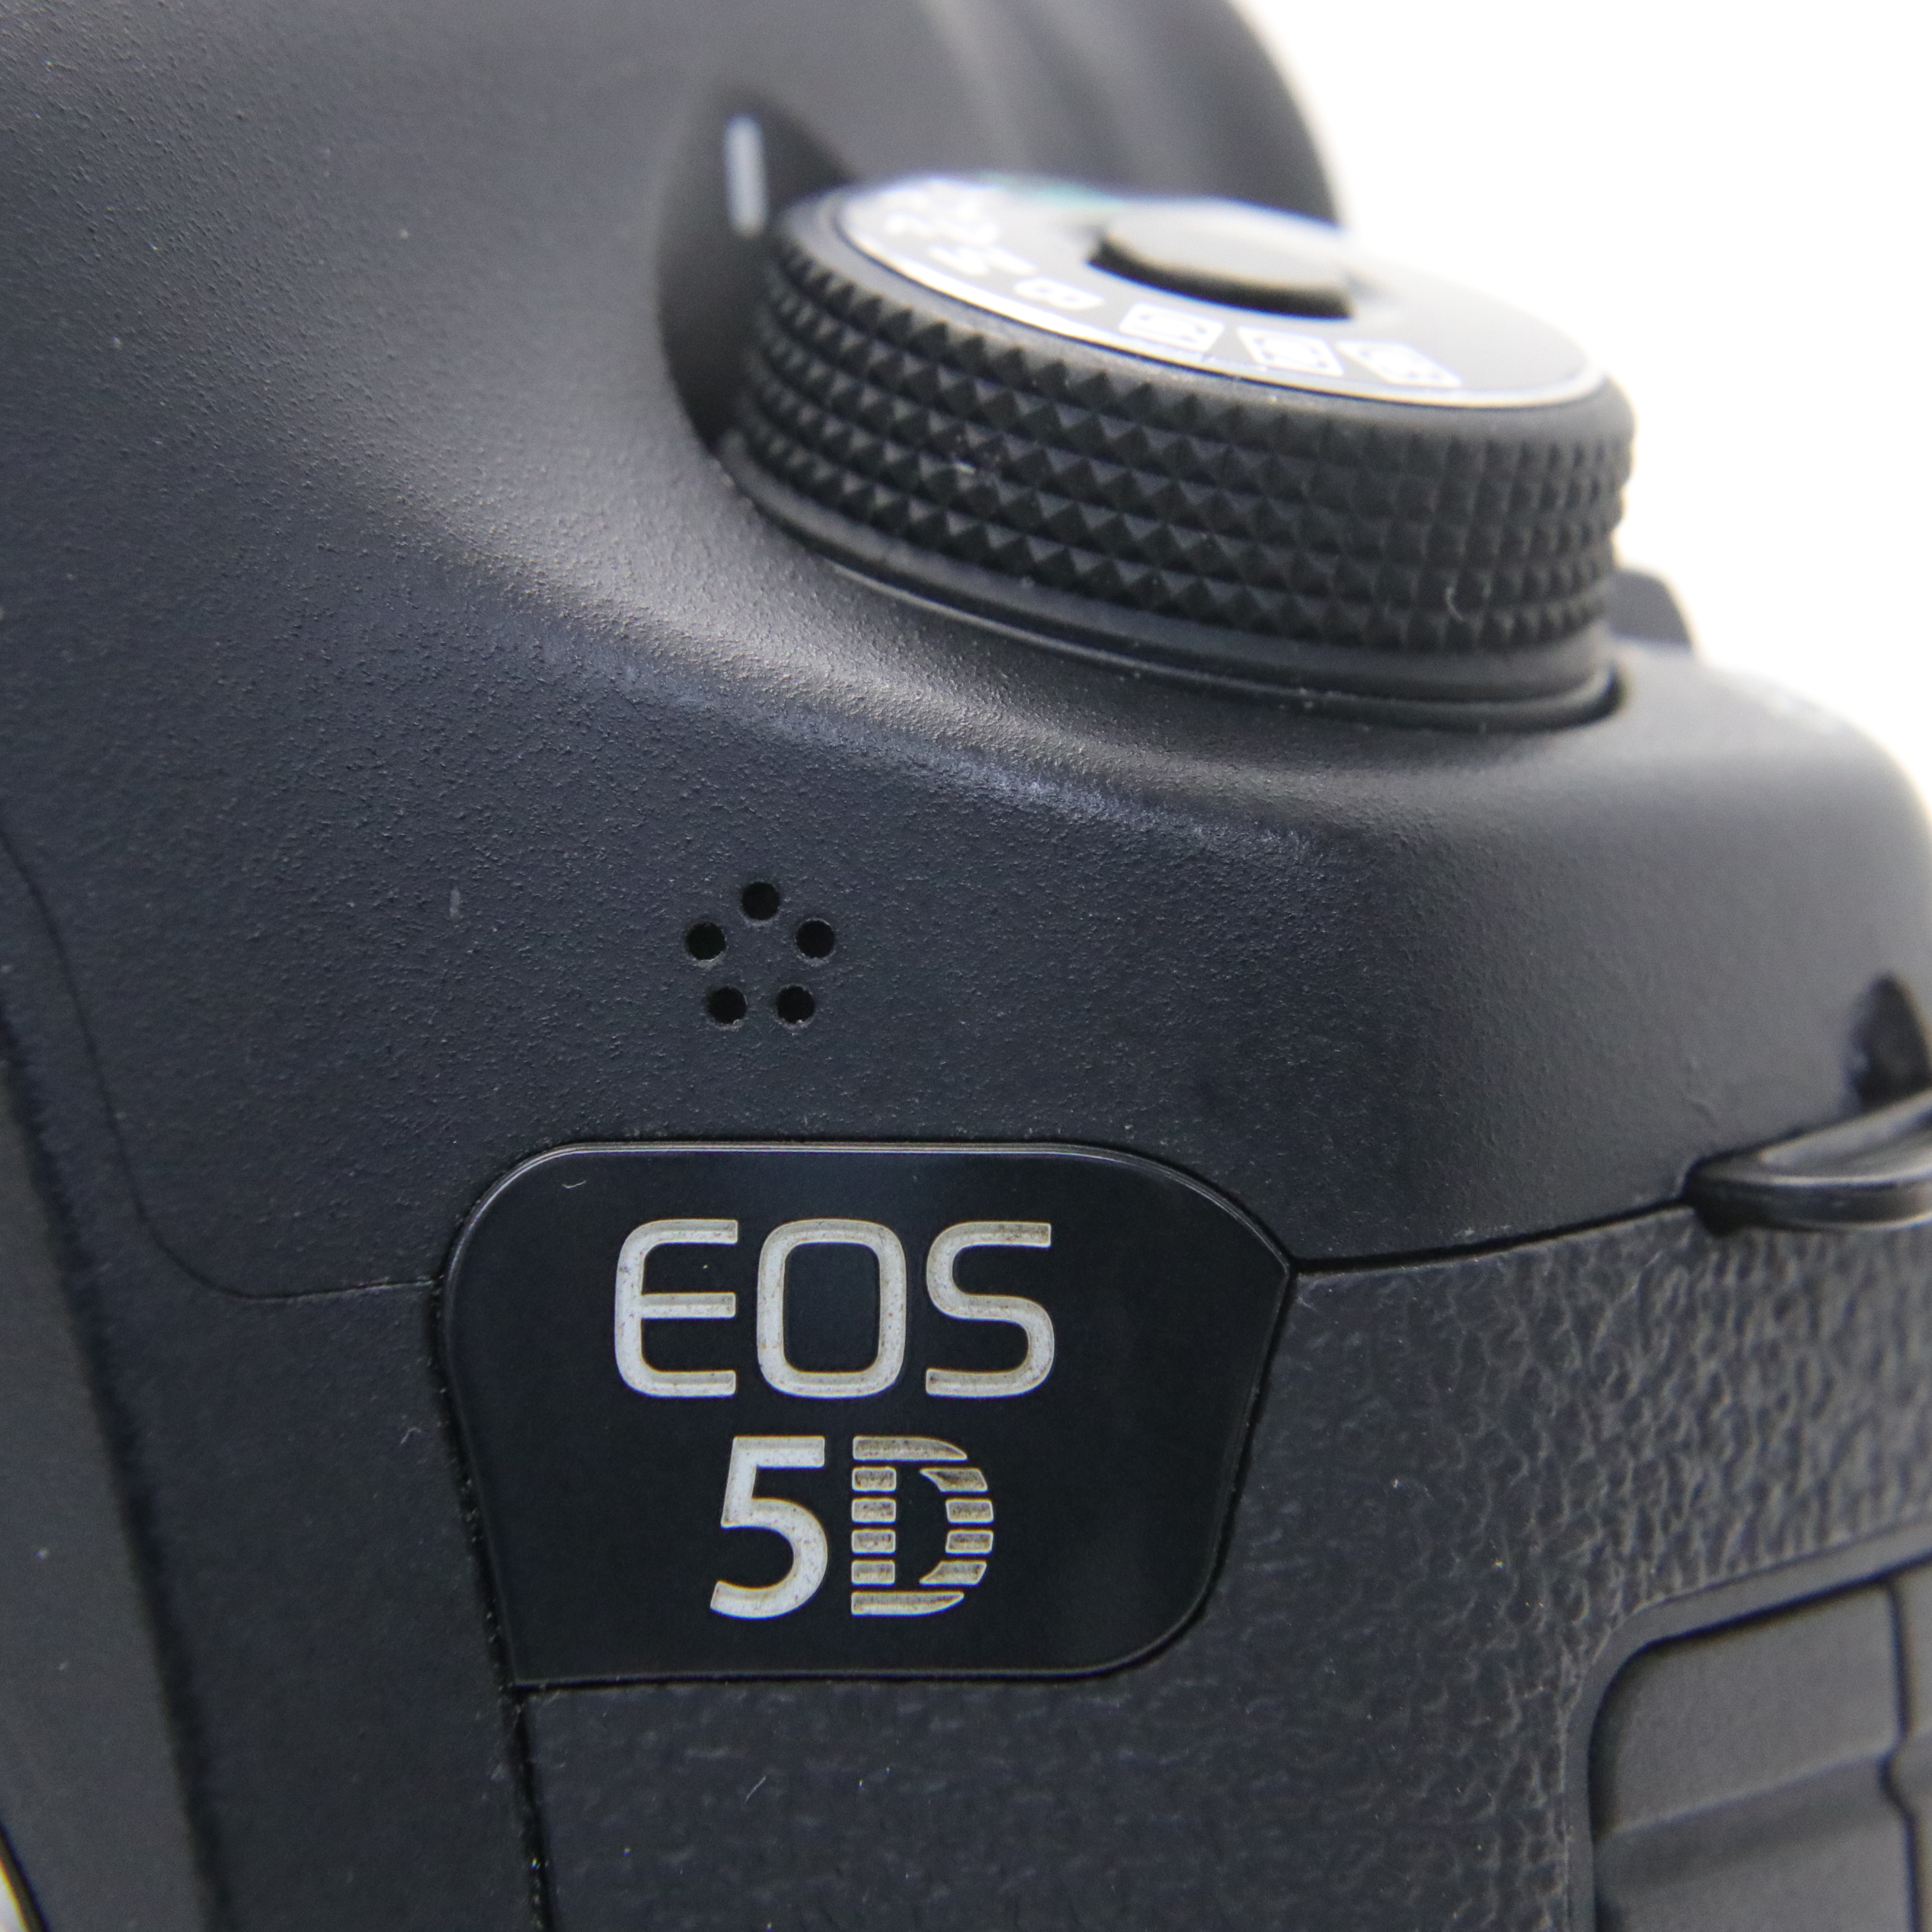 Canon eos 5d software download